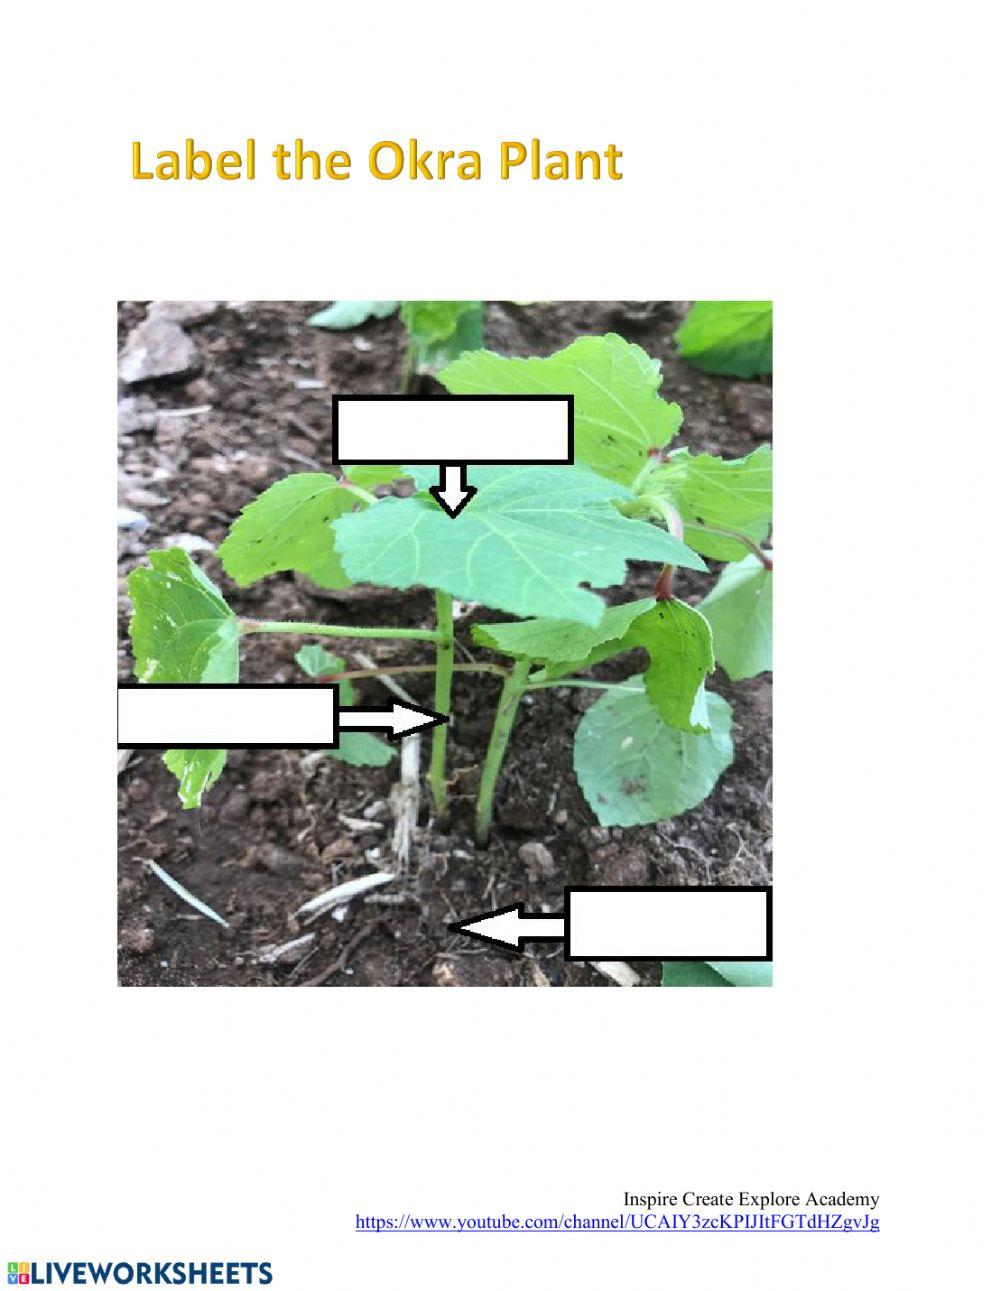 Label The Diagram of The Okra Plant